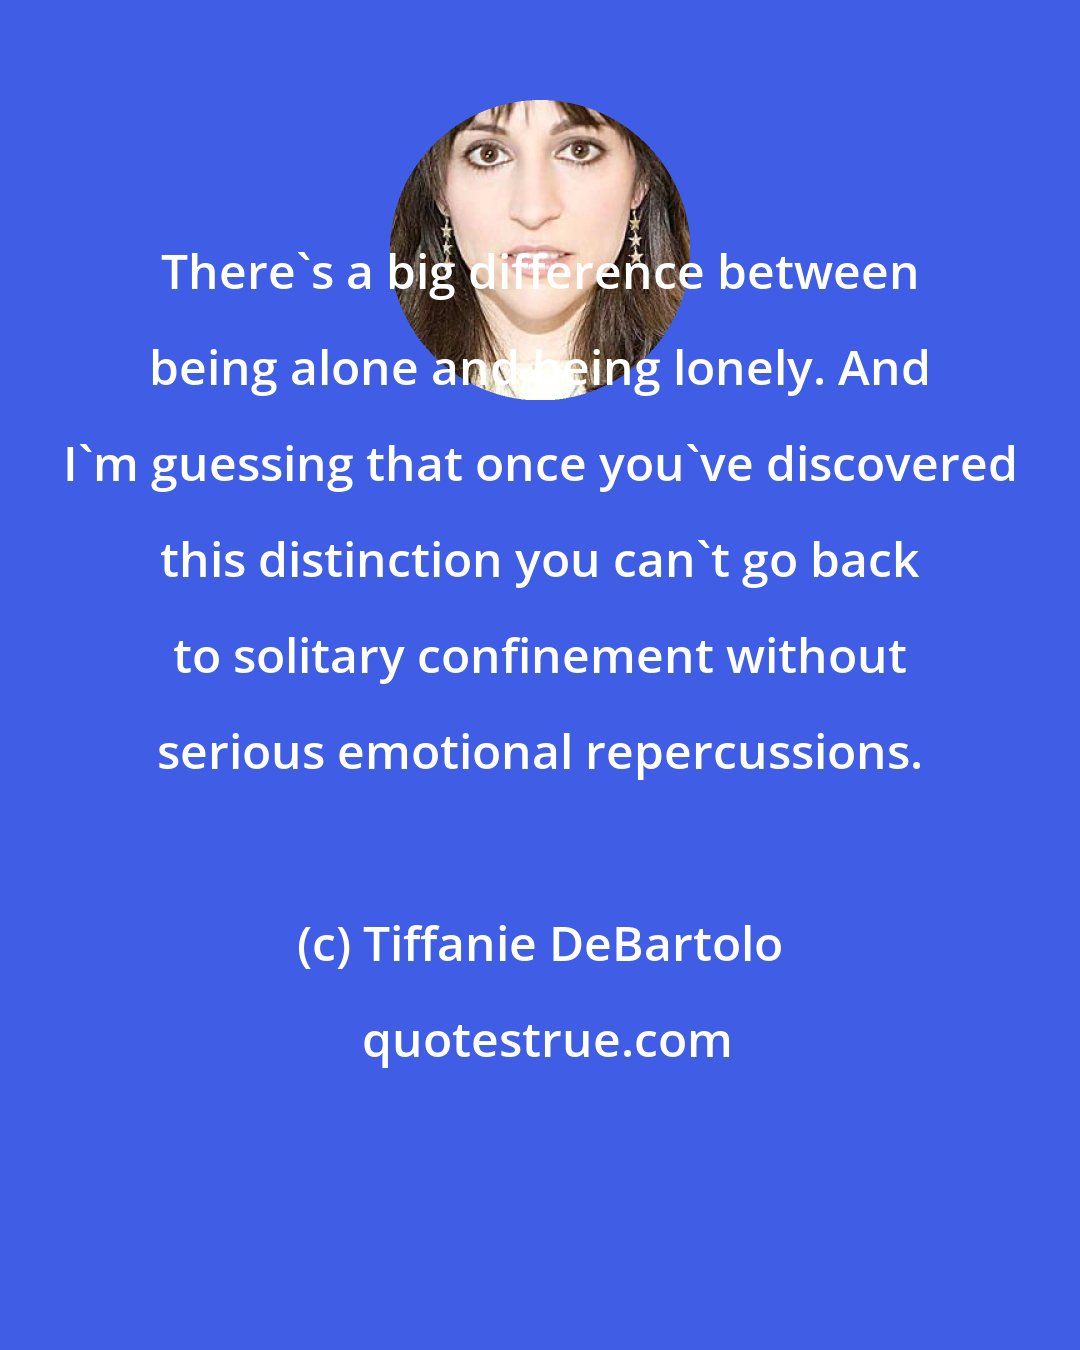 Tiffanie DeBartolo: There's a big difference between being alone and being lonely. And I'm guessing that once you've discovered this distinction you can't go back to solitary confinement without serious emotional repercussions.